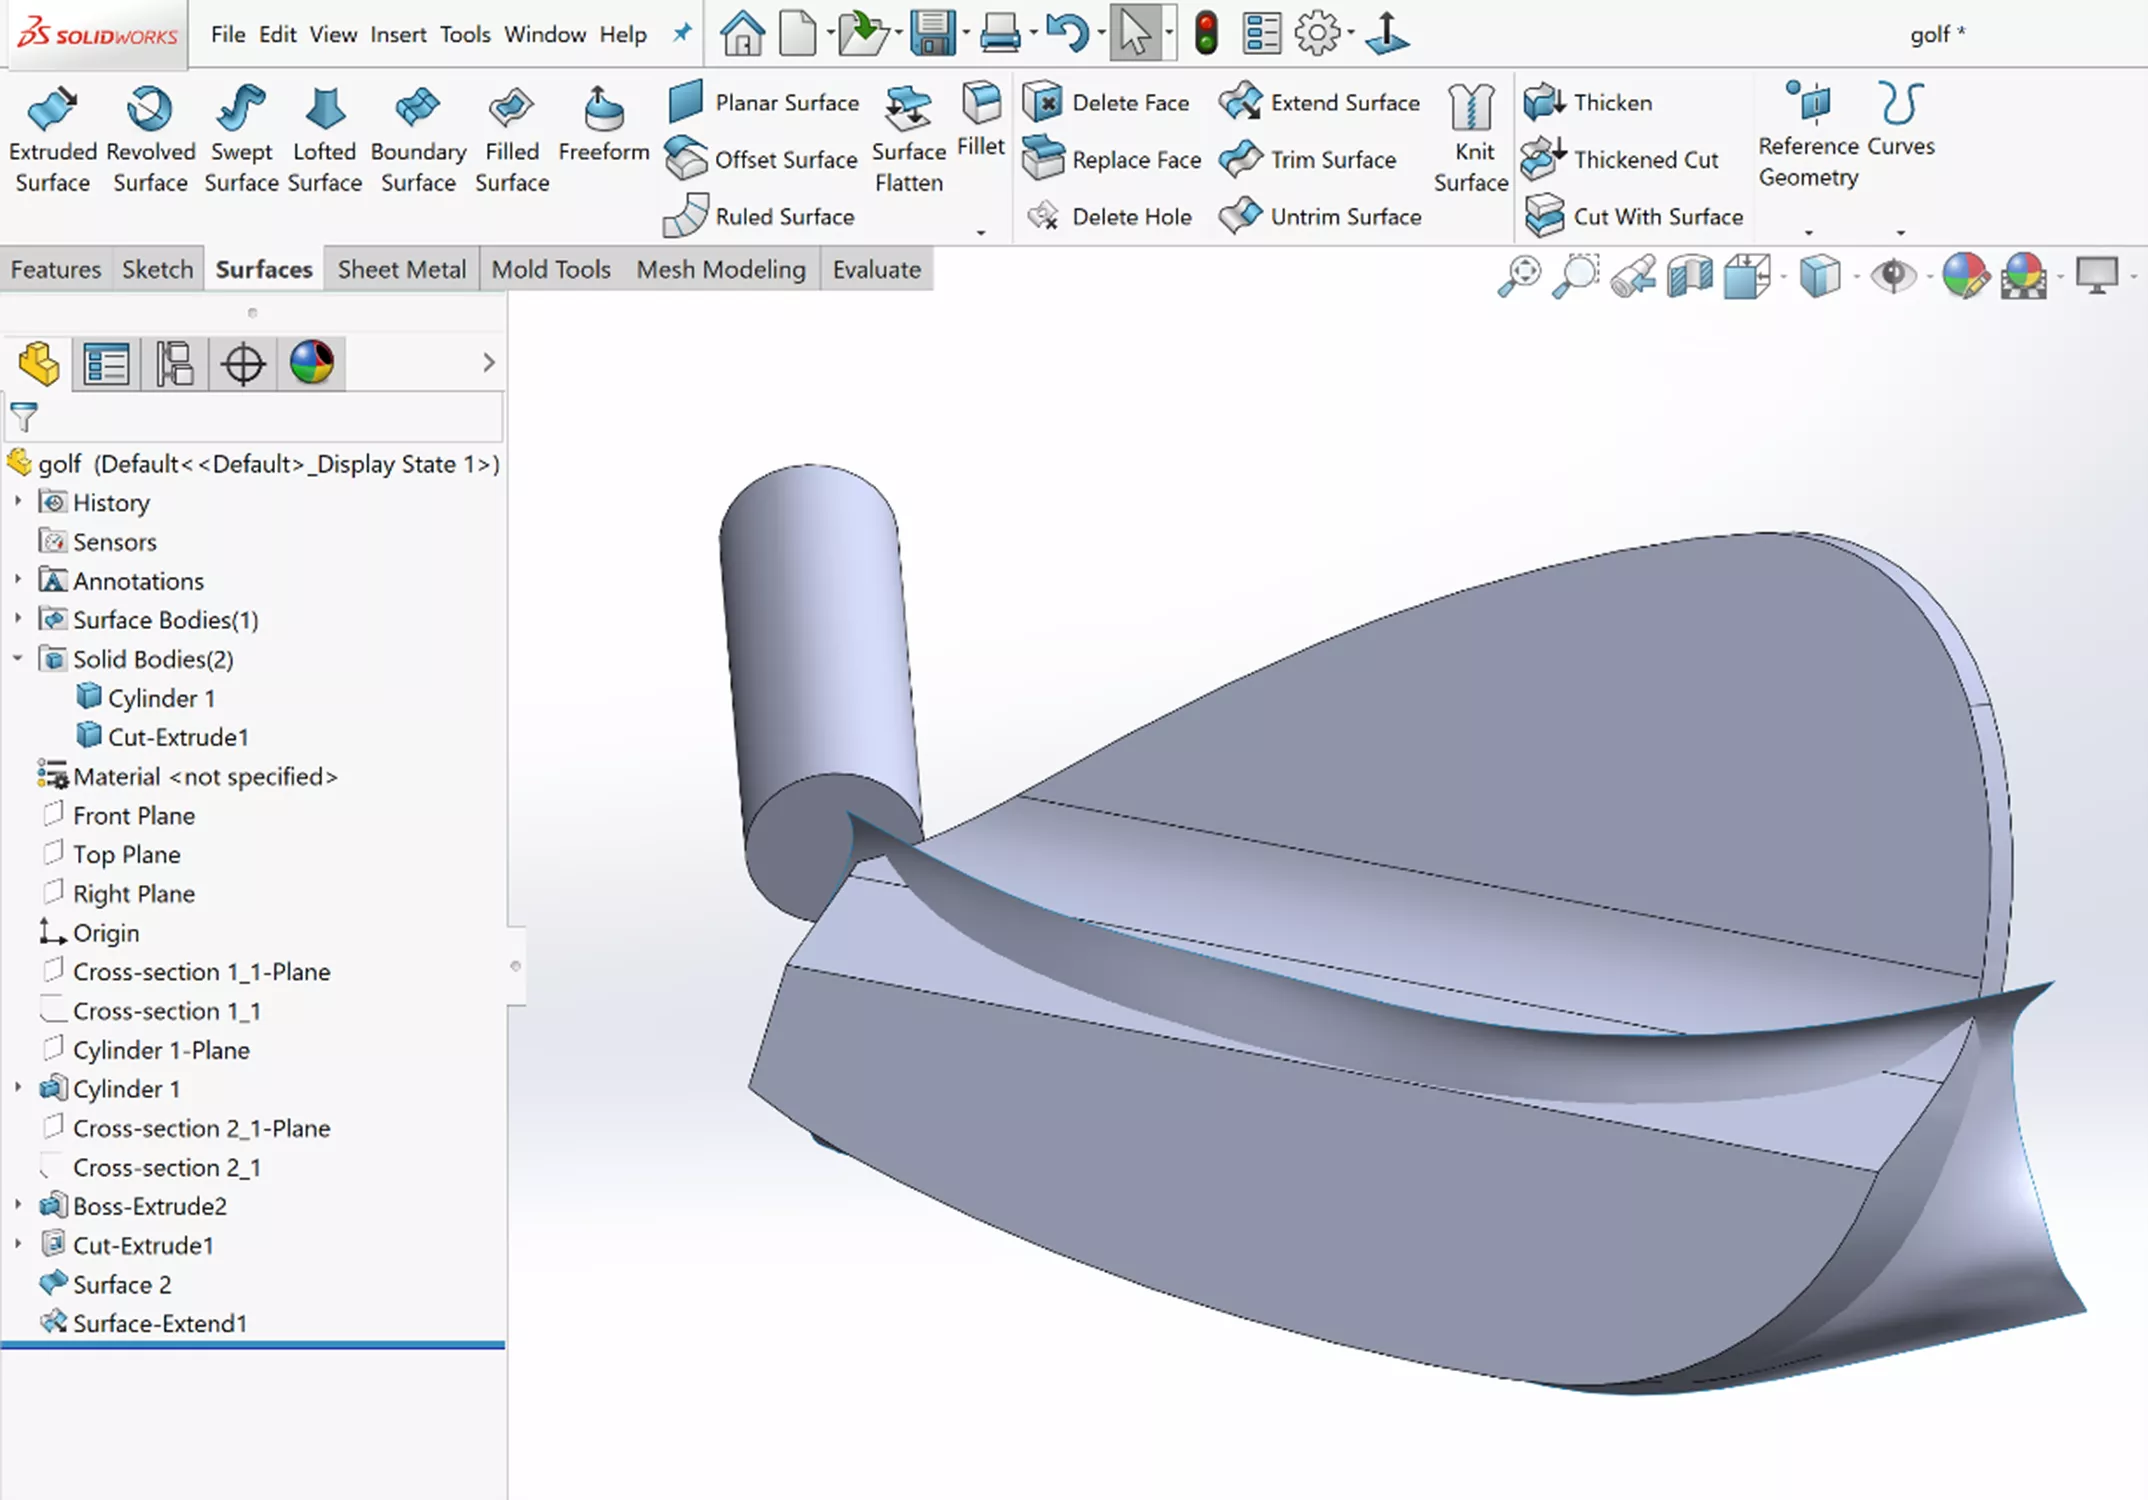 SOLIDWORKS Surfacing Tools for Reverse Engineered Applications